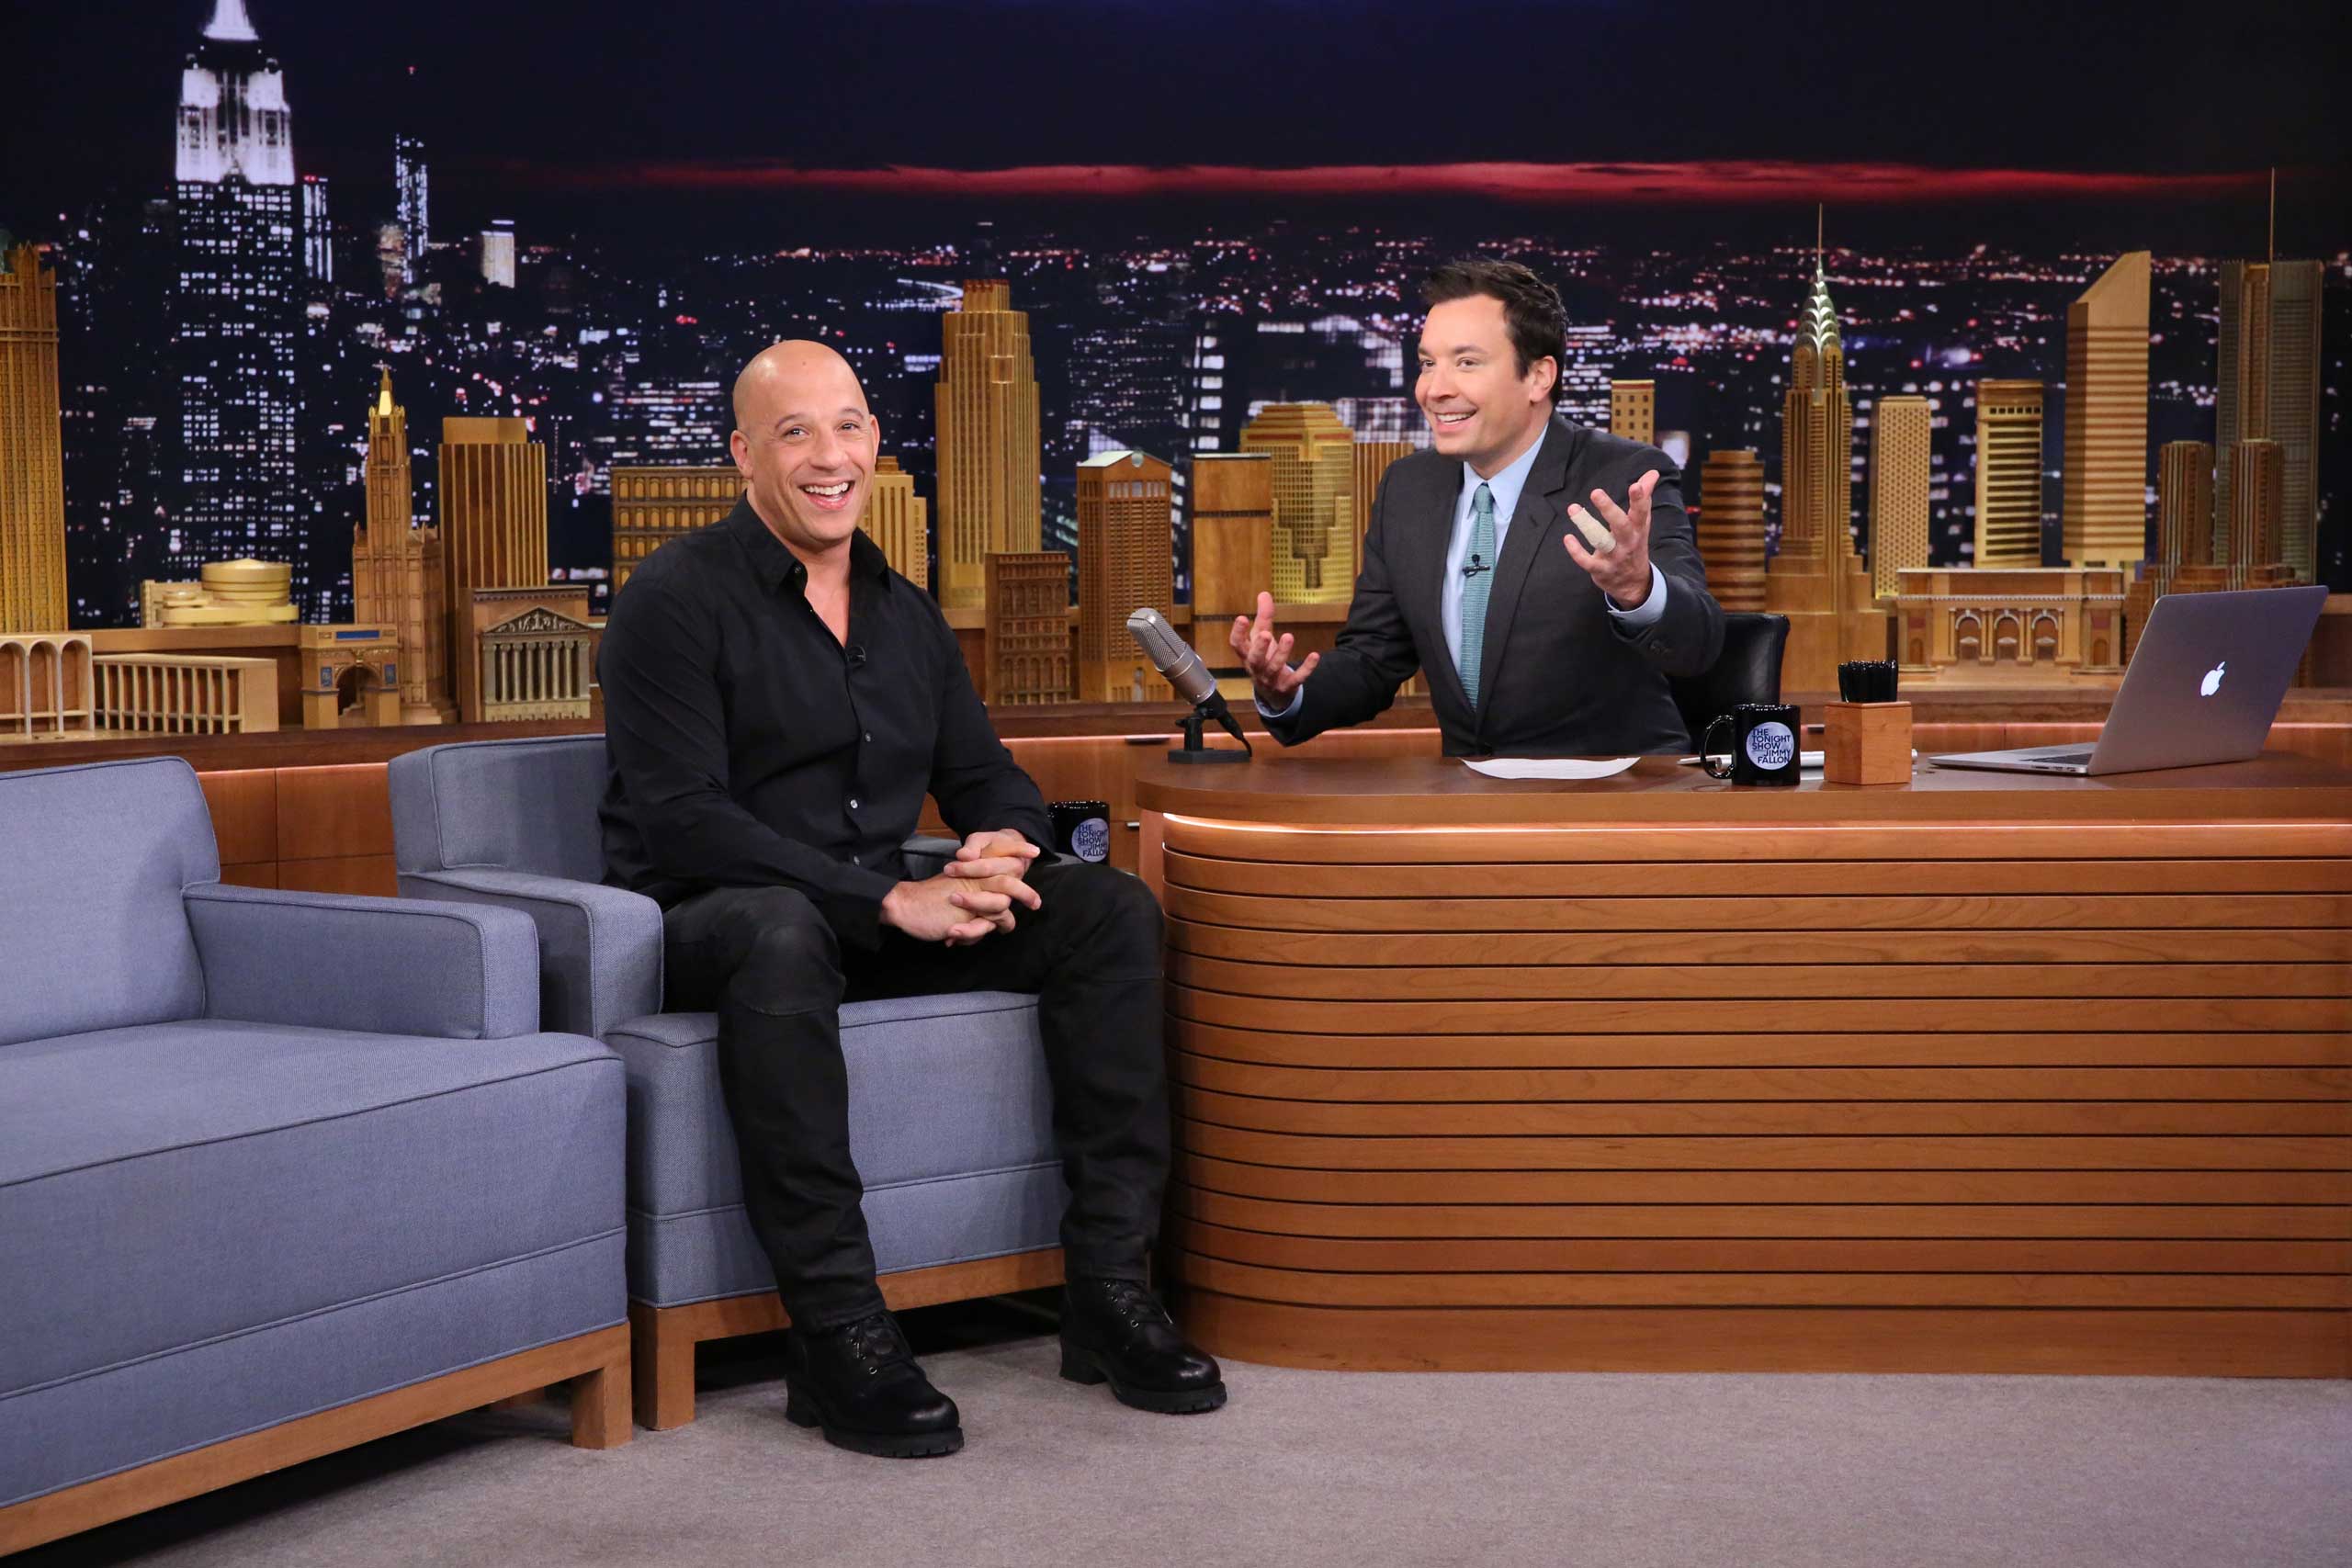 Vin Diesel during an interview with host Jimmy Fallon on Oct. 14, 2015. (Douglas Gorenstein—NBC/Getty Images)